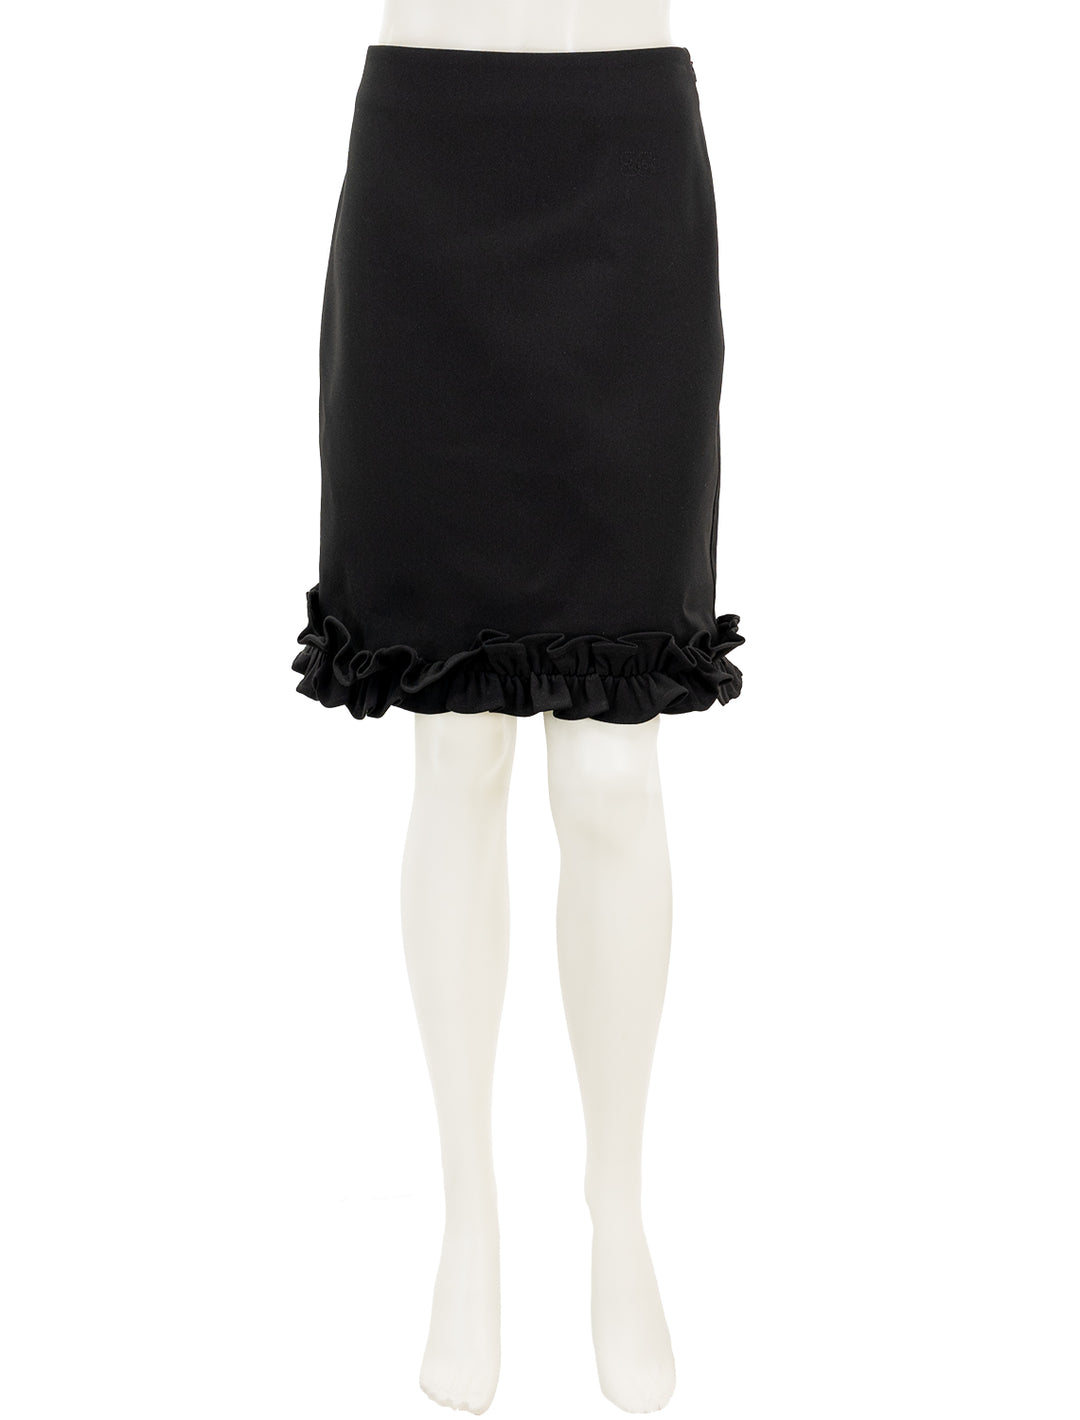 Front view of GANNI's bonded crepe skirt in black.